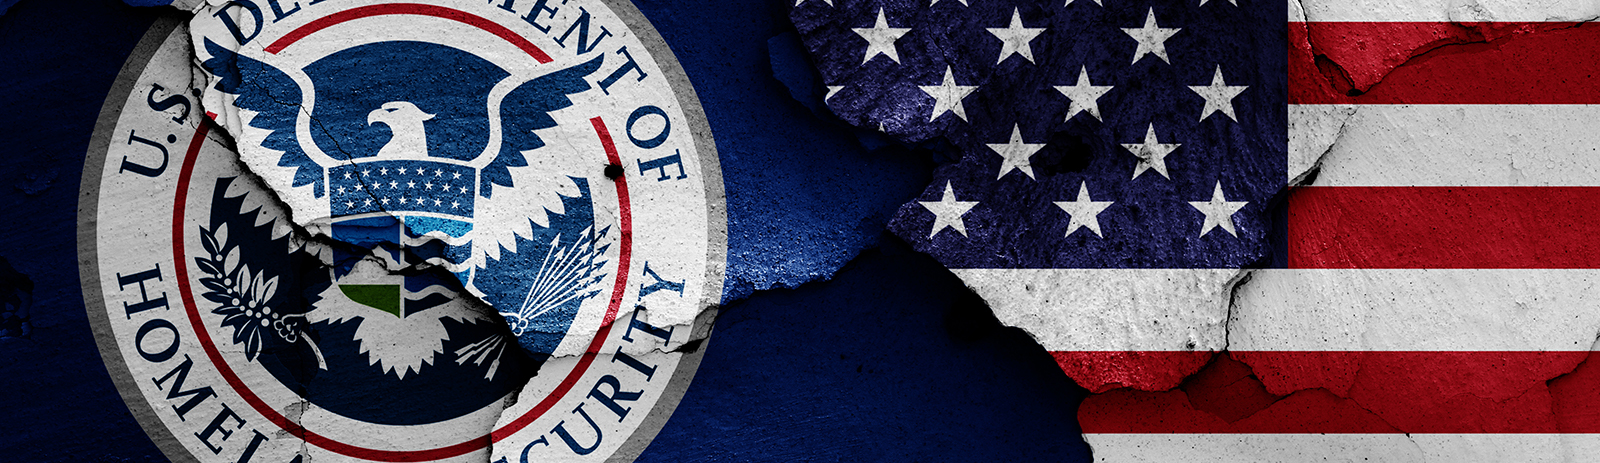 United States Department of Homeland Security image